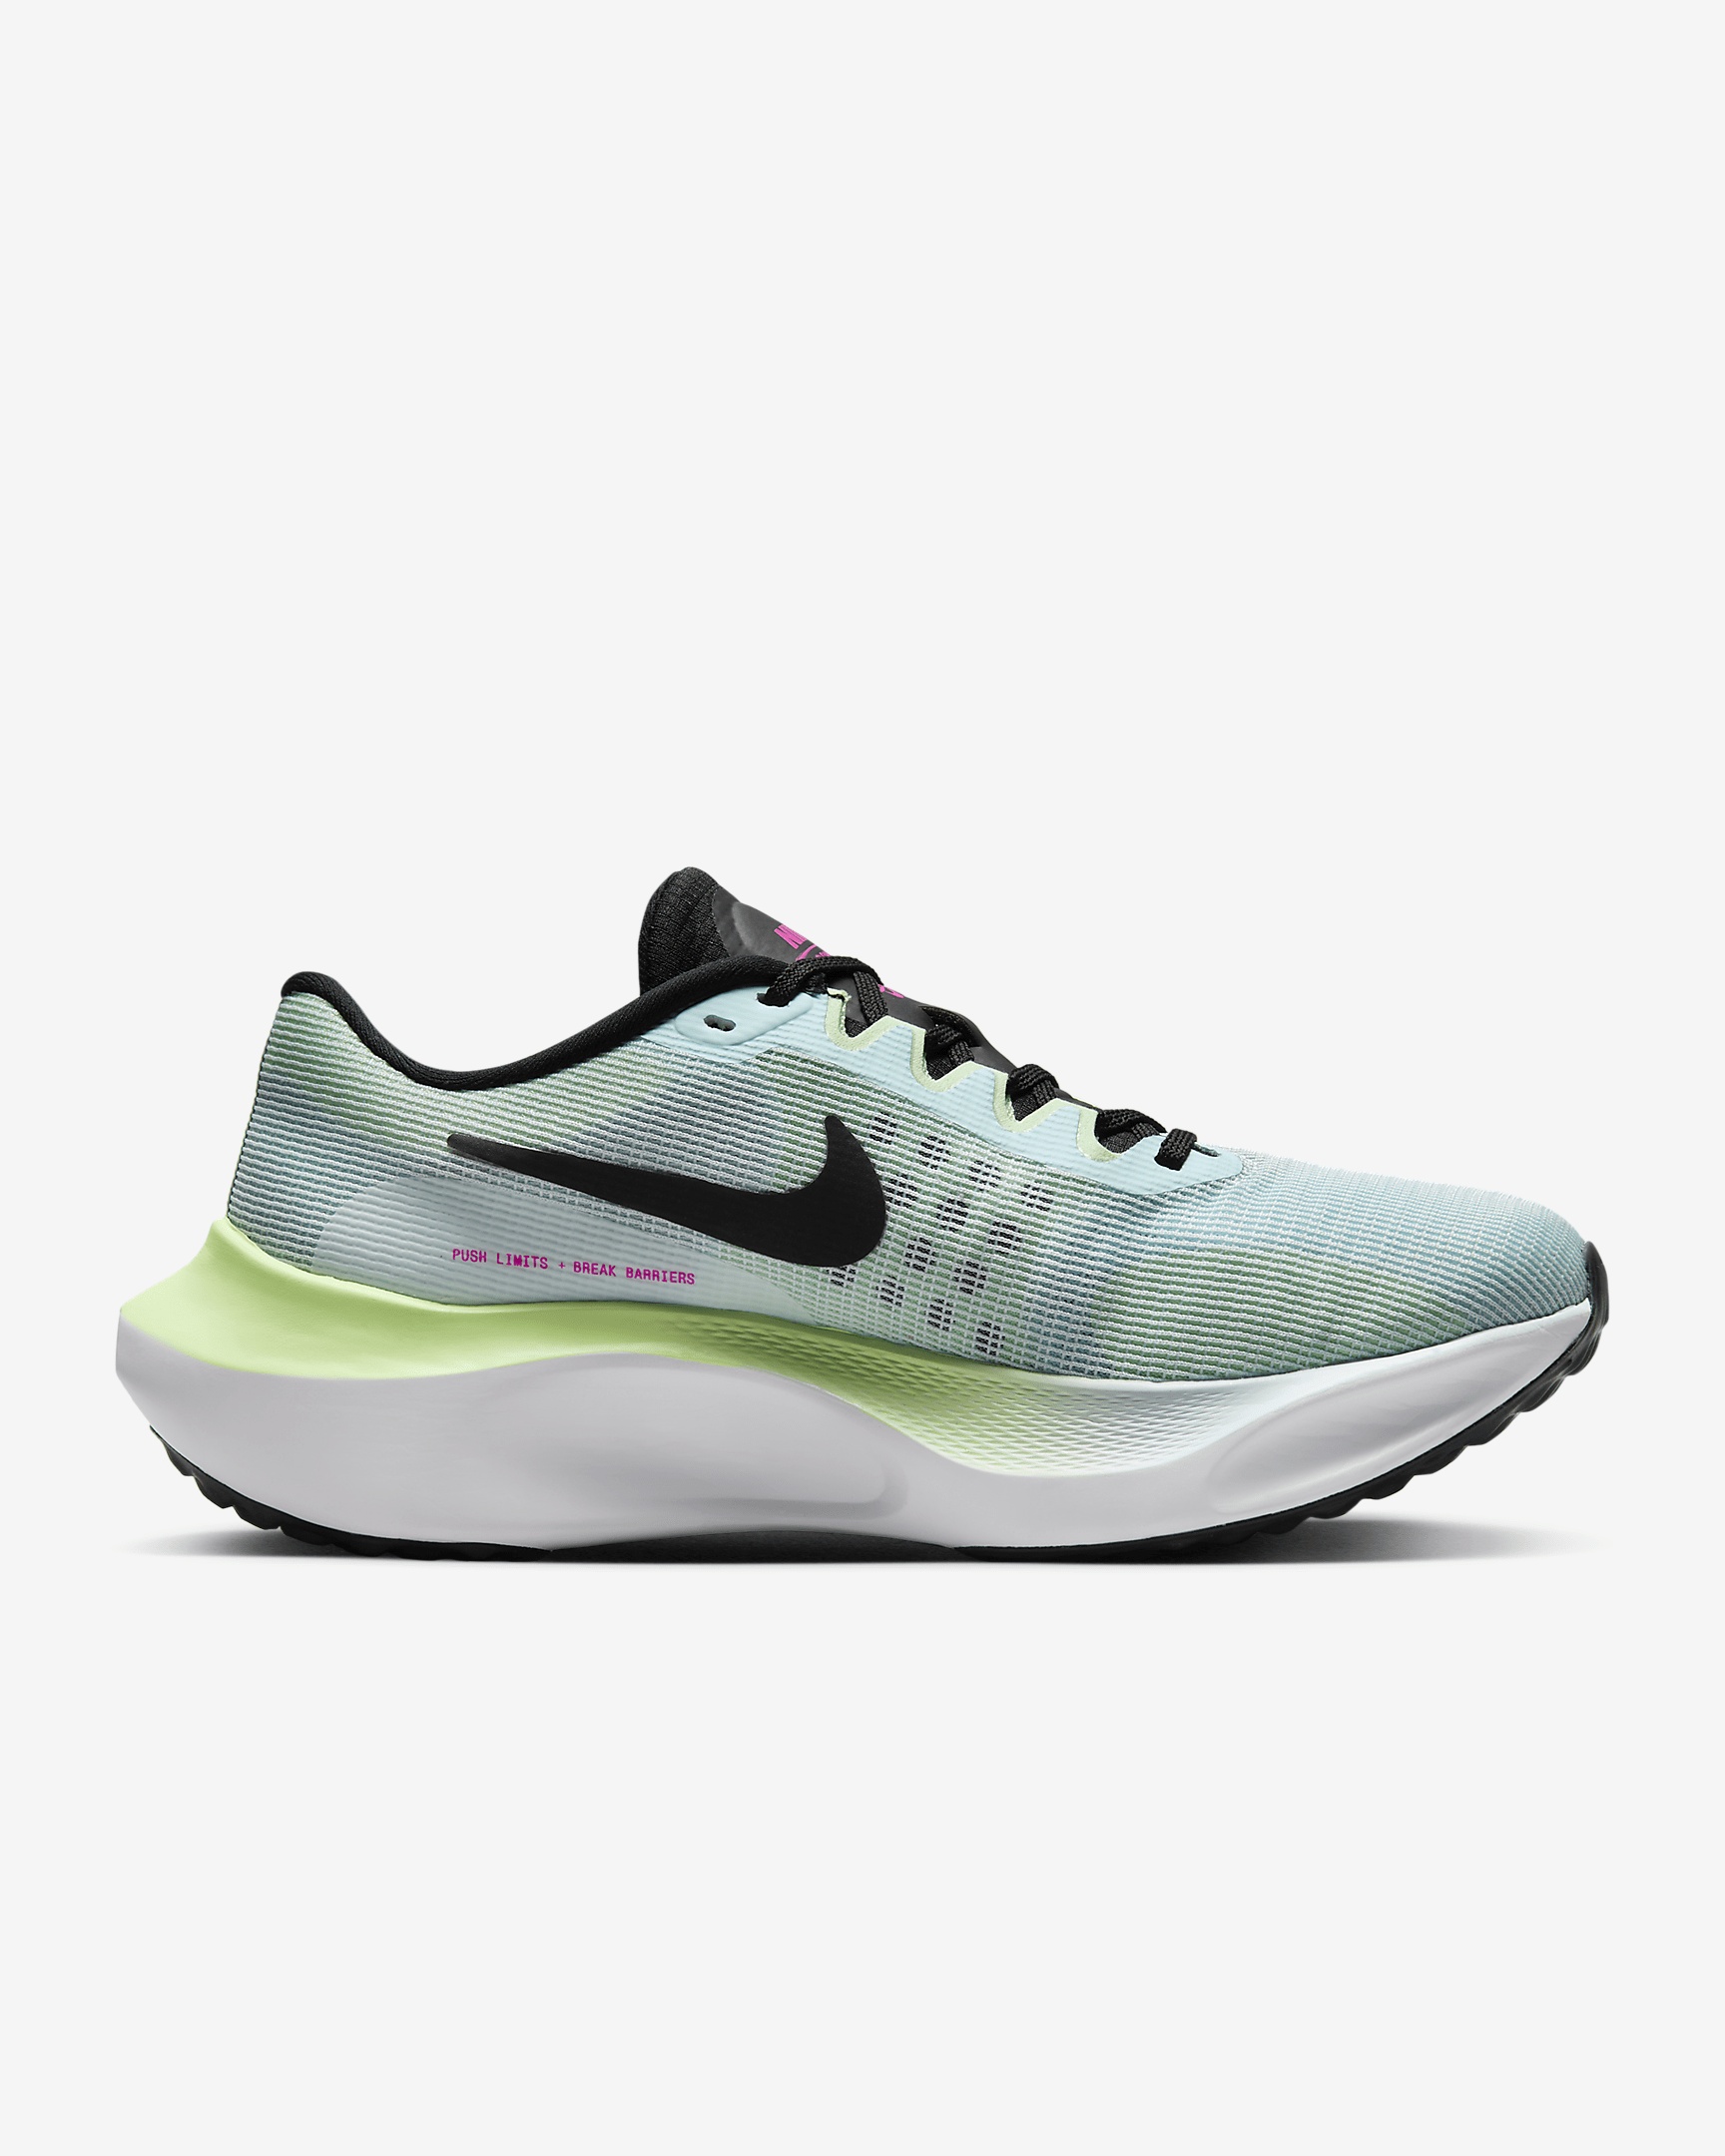 Nike Women's Zoom Fly 5 Road Running Shoes - 3